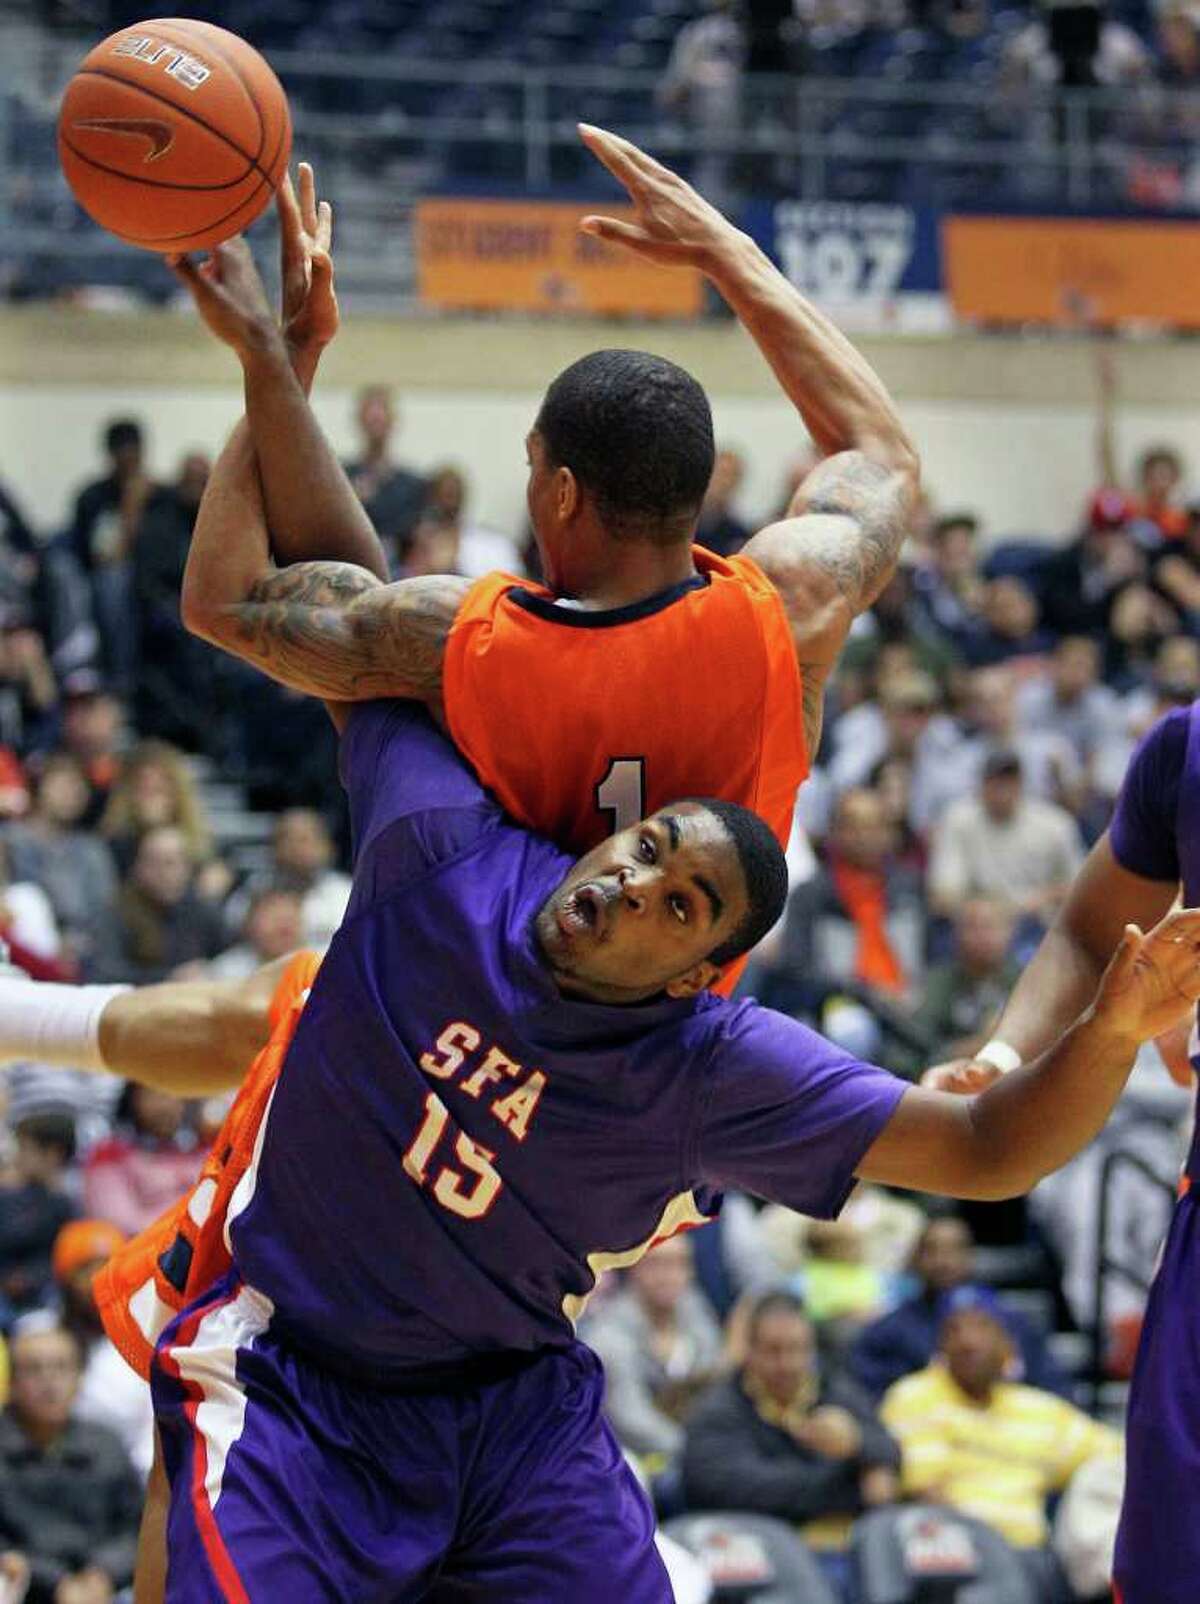 SFA's Joe Bright moves under the rebounding effort of Stephen Franklin and is called for a position foul as the Roadrunners play the SFA Lumberjacks at the UTSA Convocation Center on February 11, 2012 Tom Reel/ San Antonio Express-News